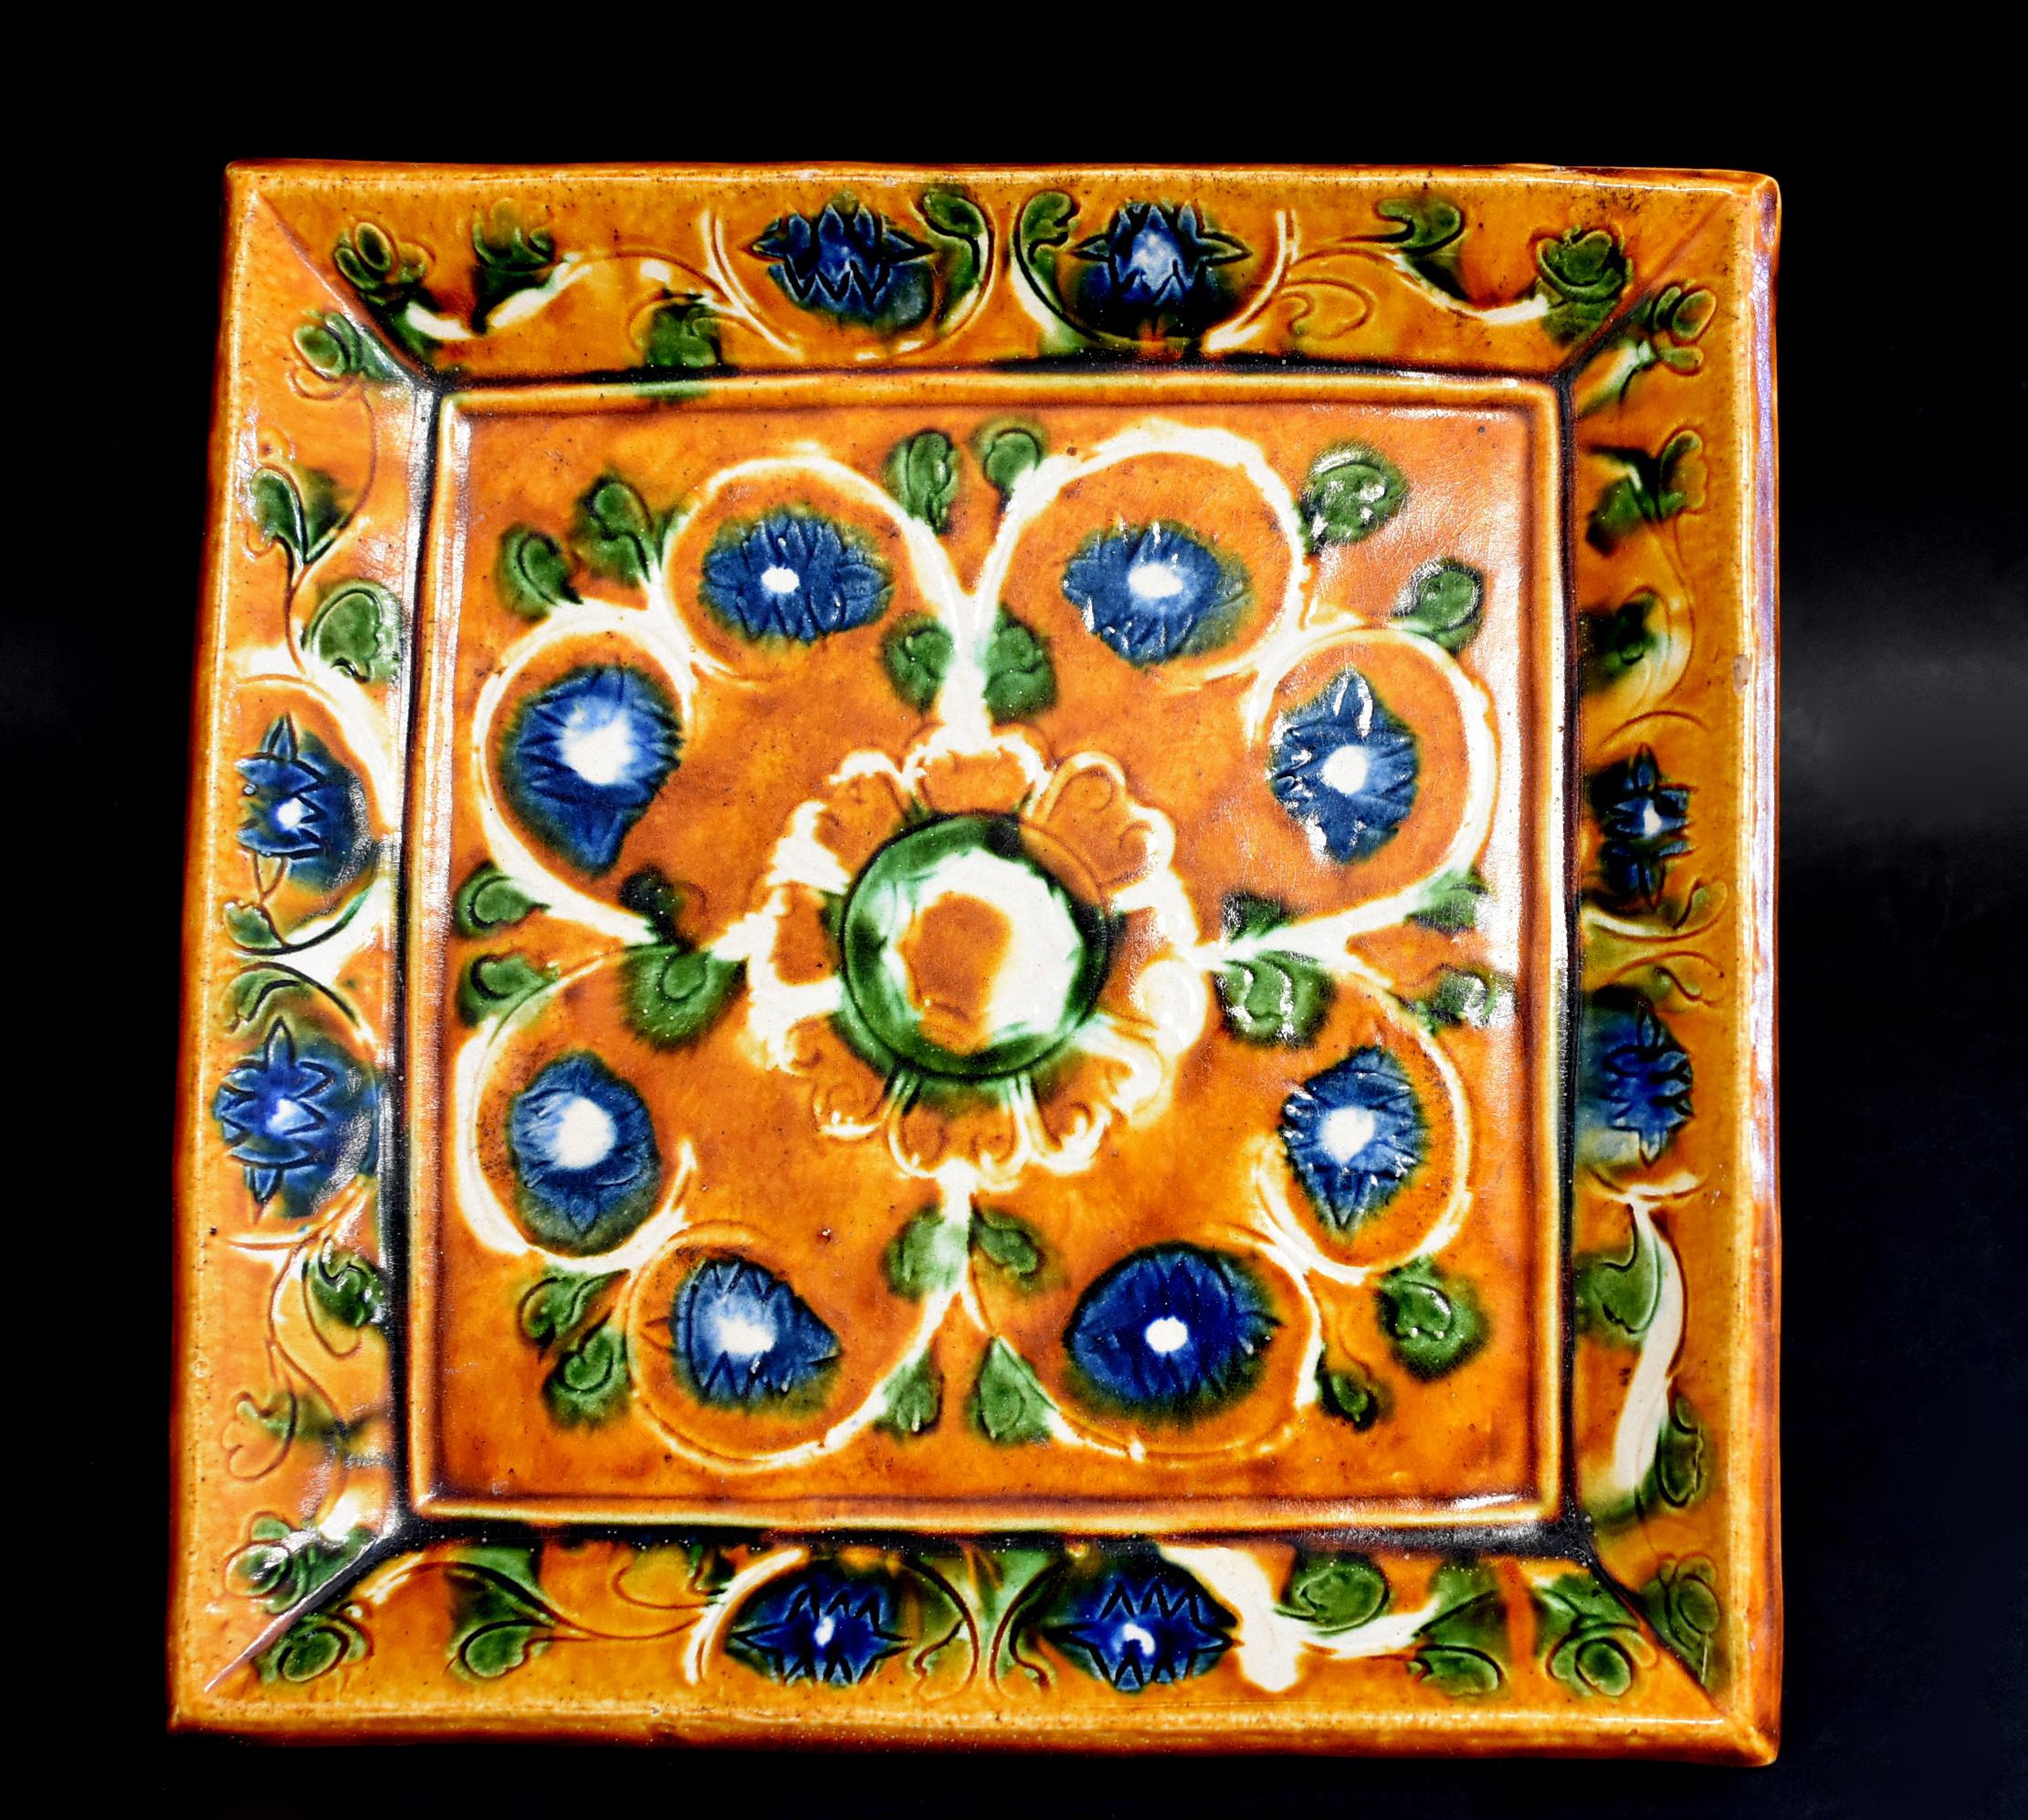 The square plate is beautifully painted in the center with a large bloom of white chrysanthemum, featuring a blue lotus on each petal, within a stylized design of radiating green buds on a caramel glazed ground below a rim decorated by repeating the